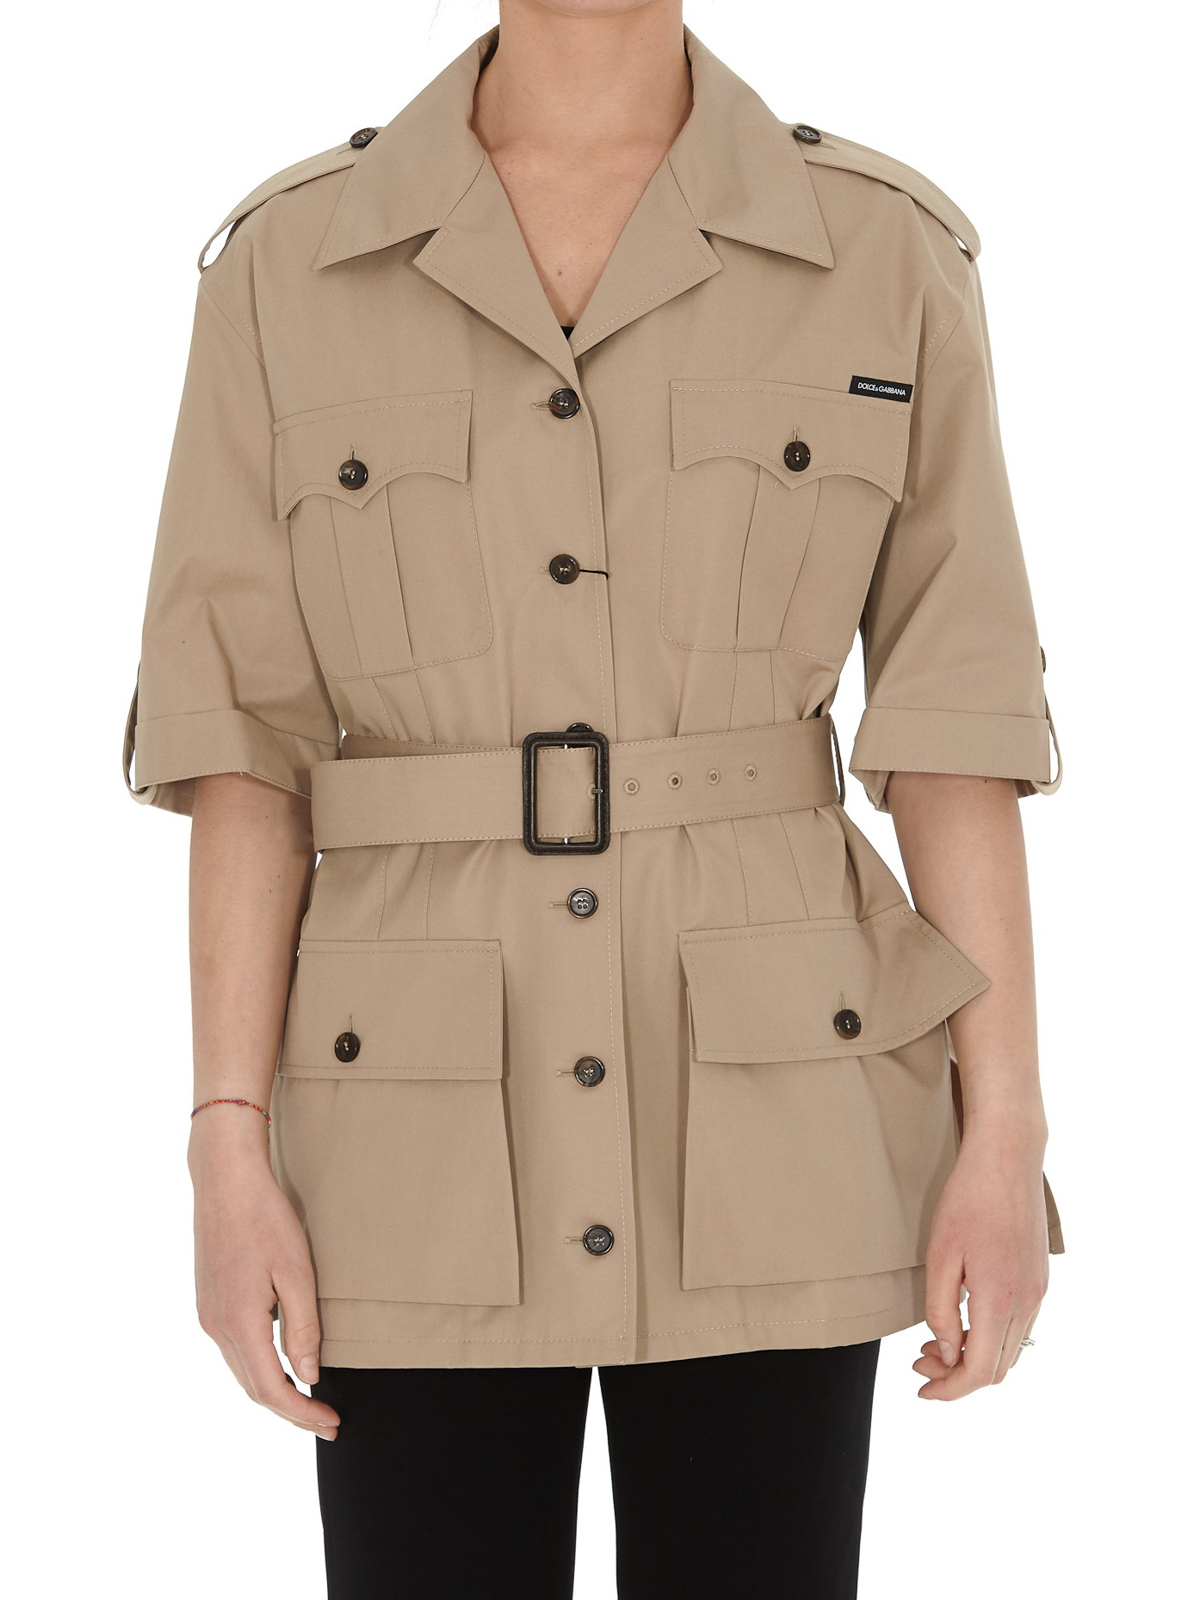 belted military coat